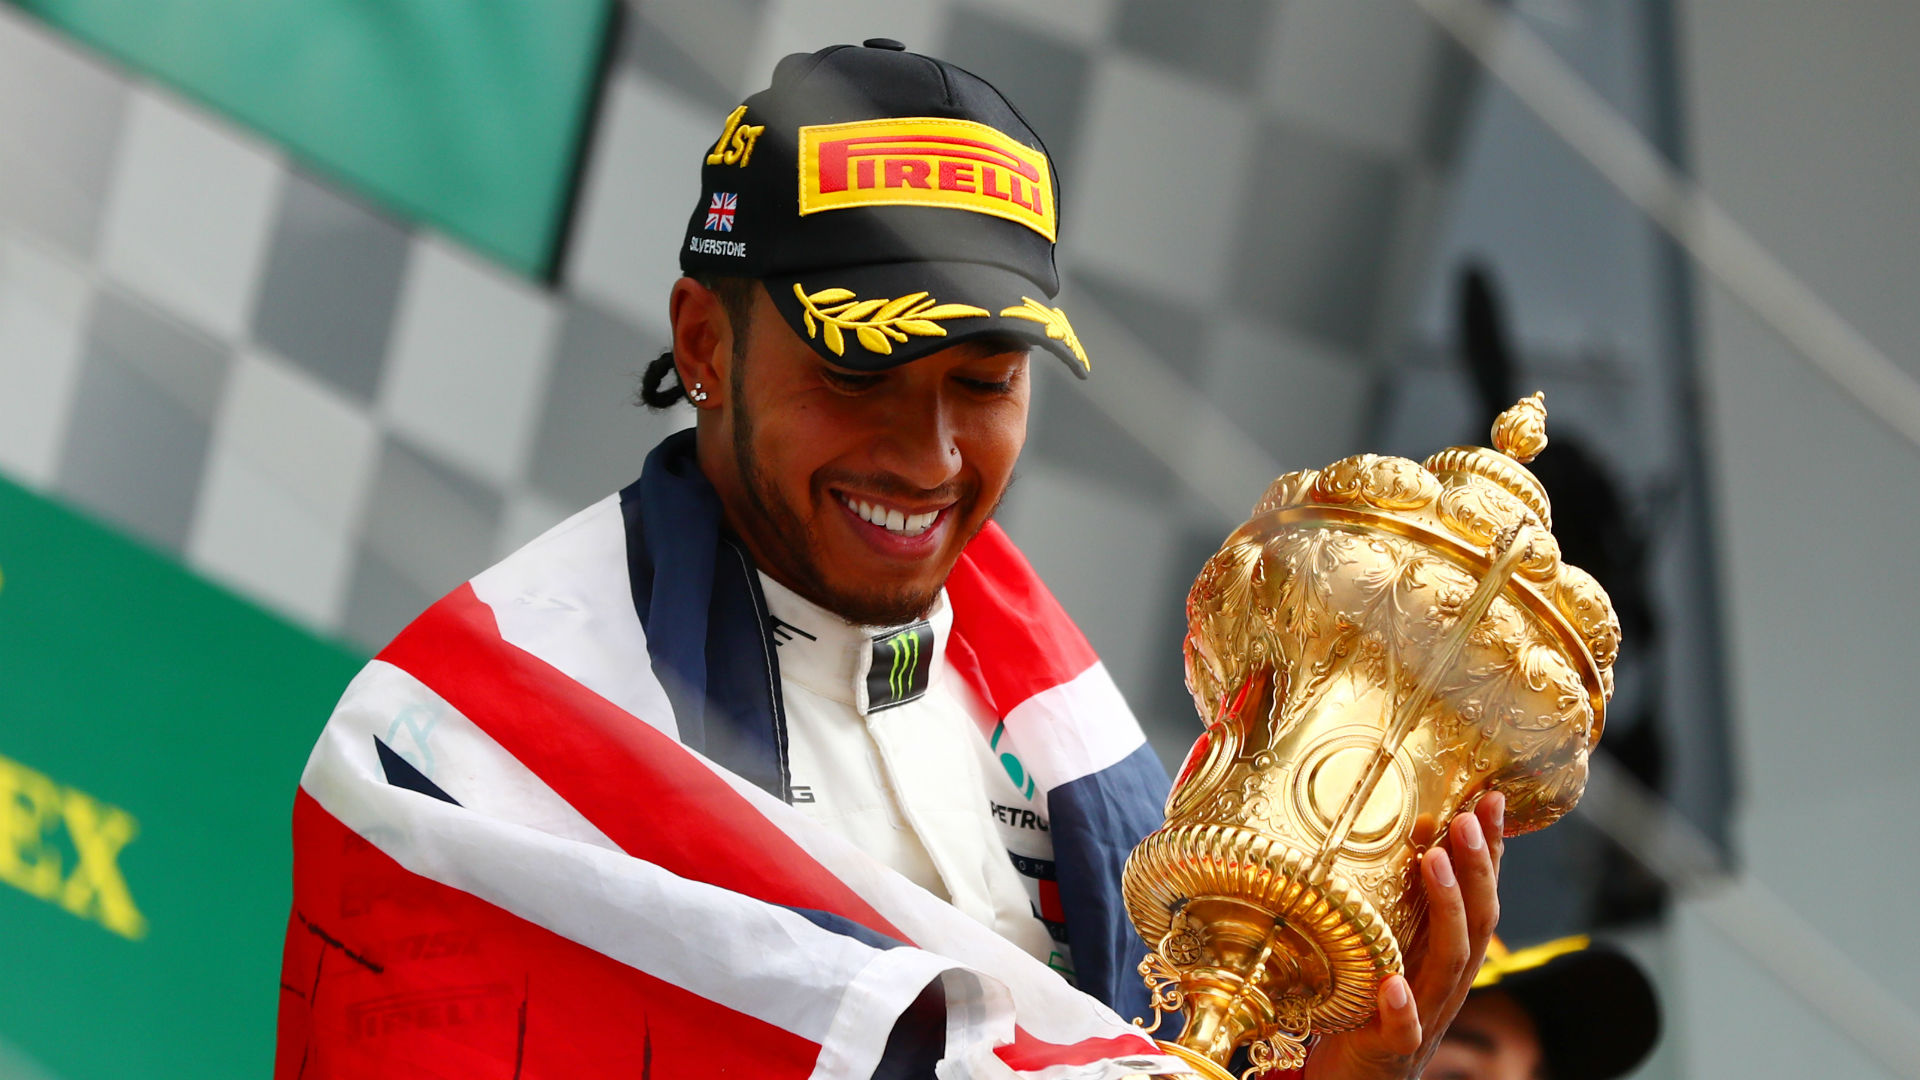 Lewis Hamilton is set for a knighthood, reports have claimed, and Andy Murray says the F1 star's achievements make him an obvious candidate.